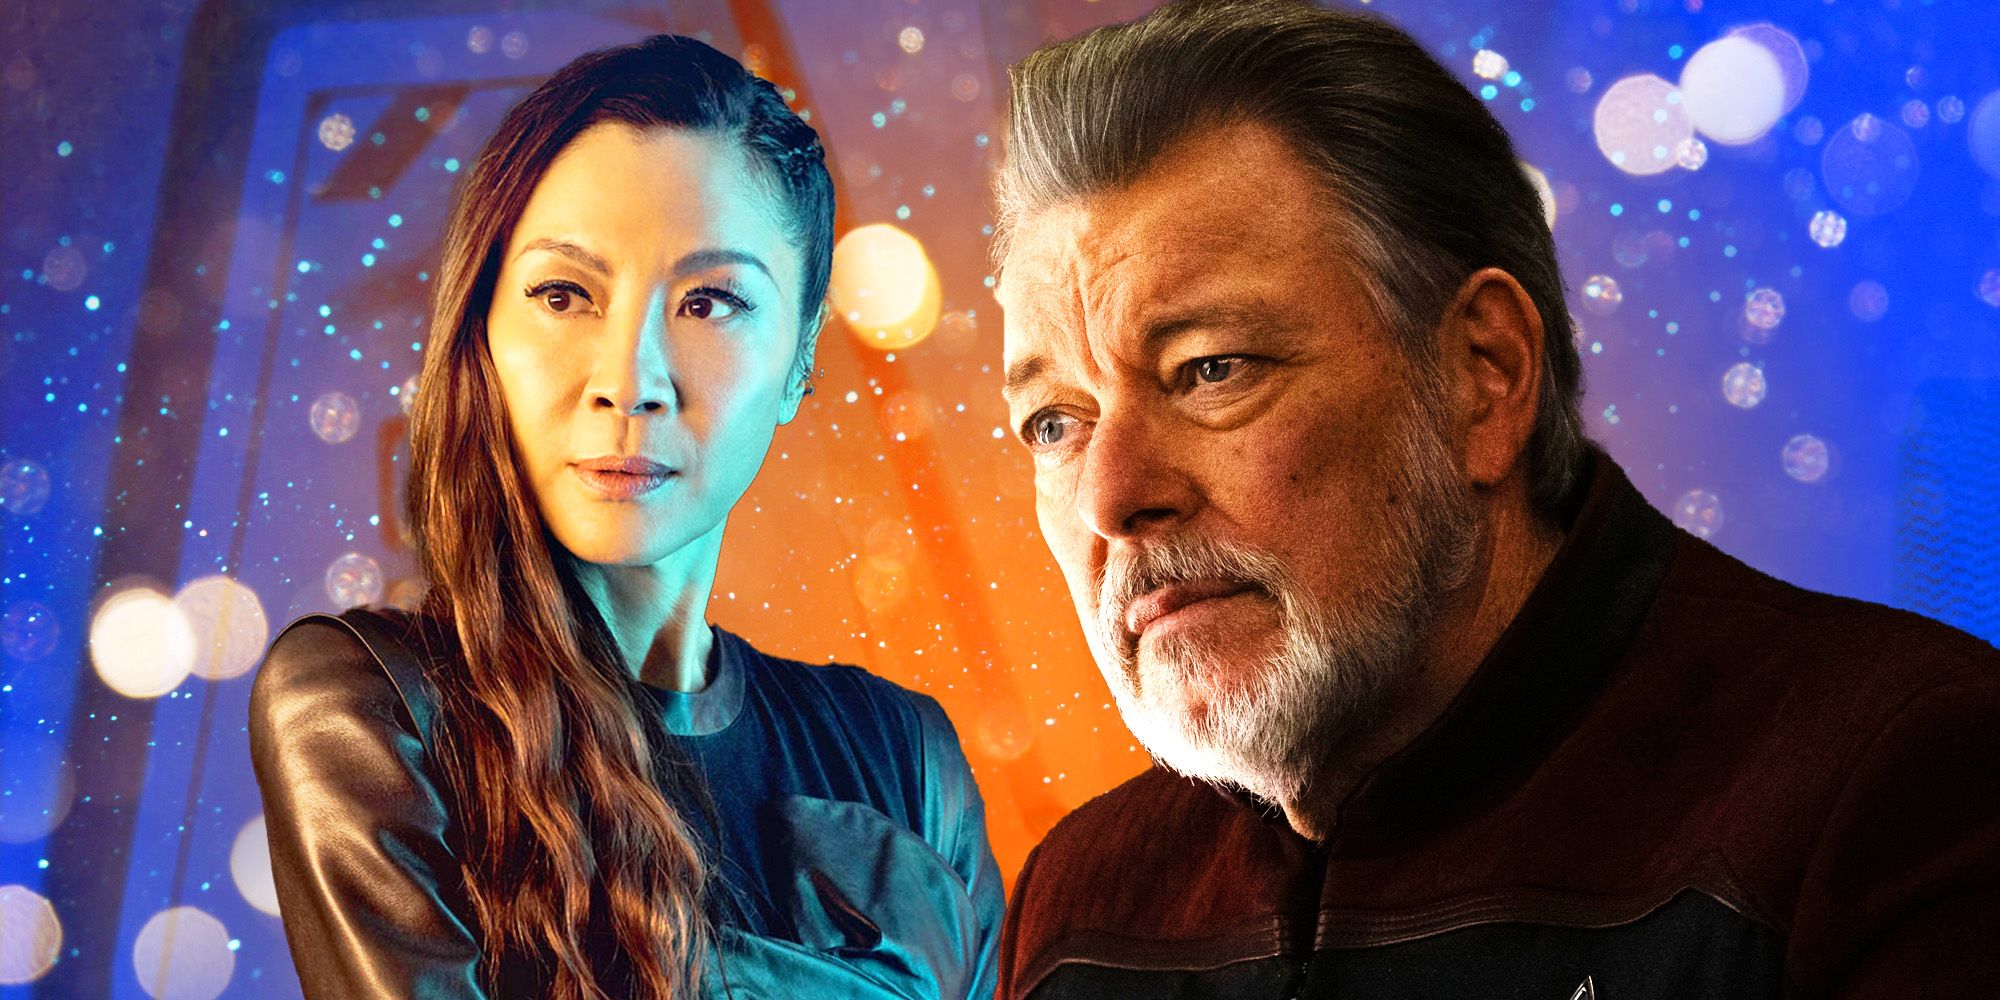 2-Hour Star Trek Is “On The Table”, Says Jonathan Frakes & What This Means For Picard’s Legacy Spinoff